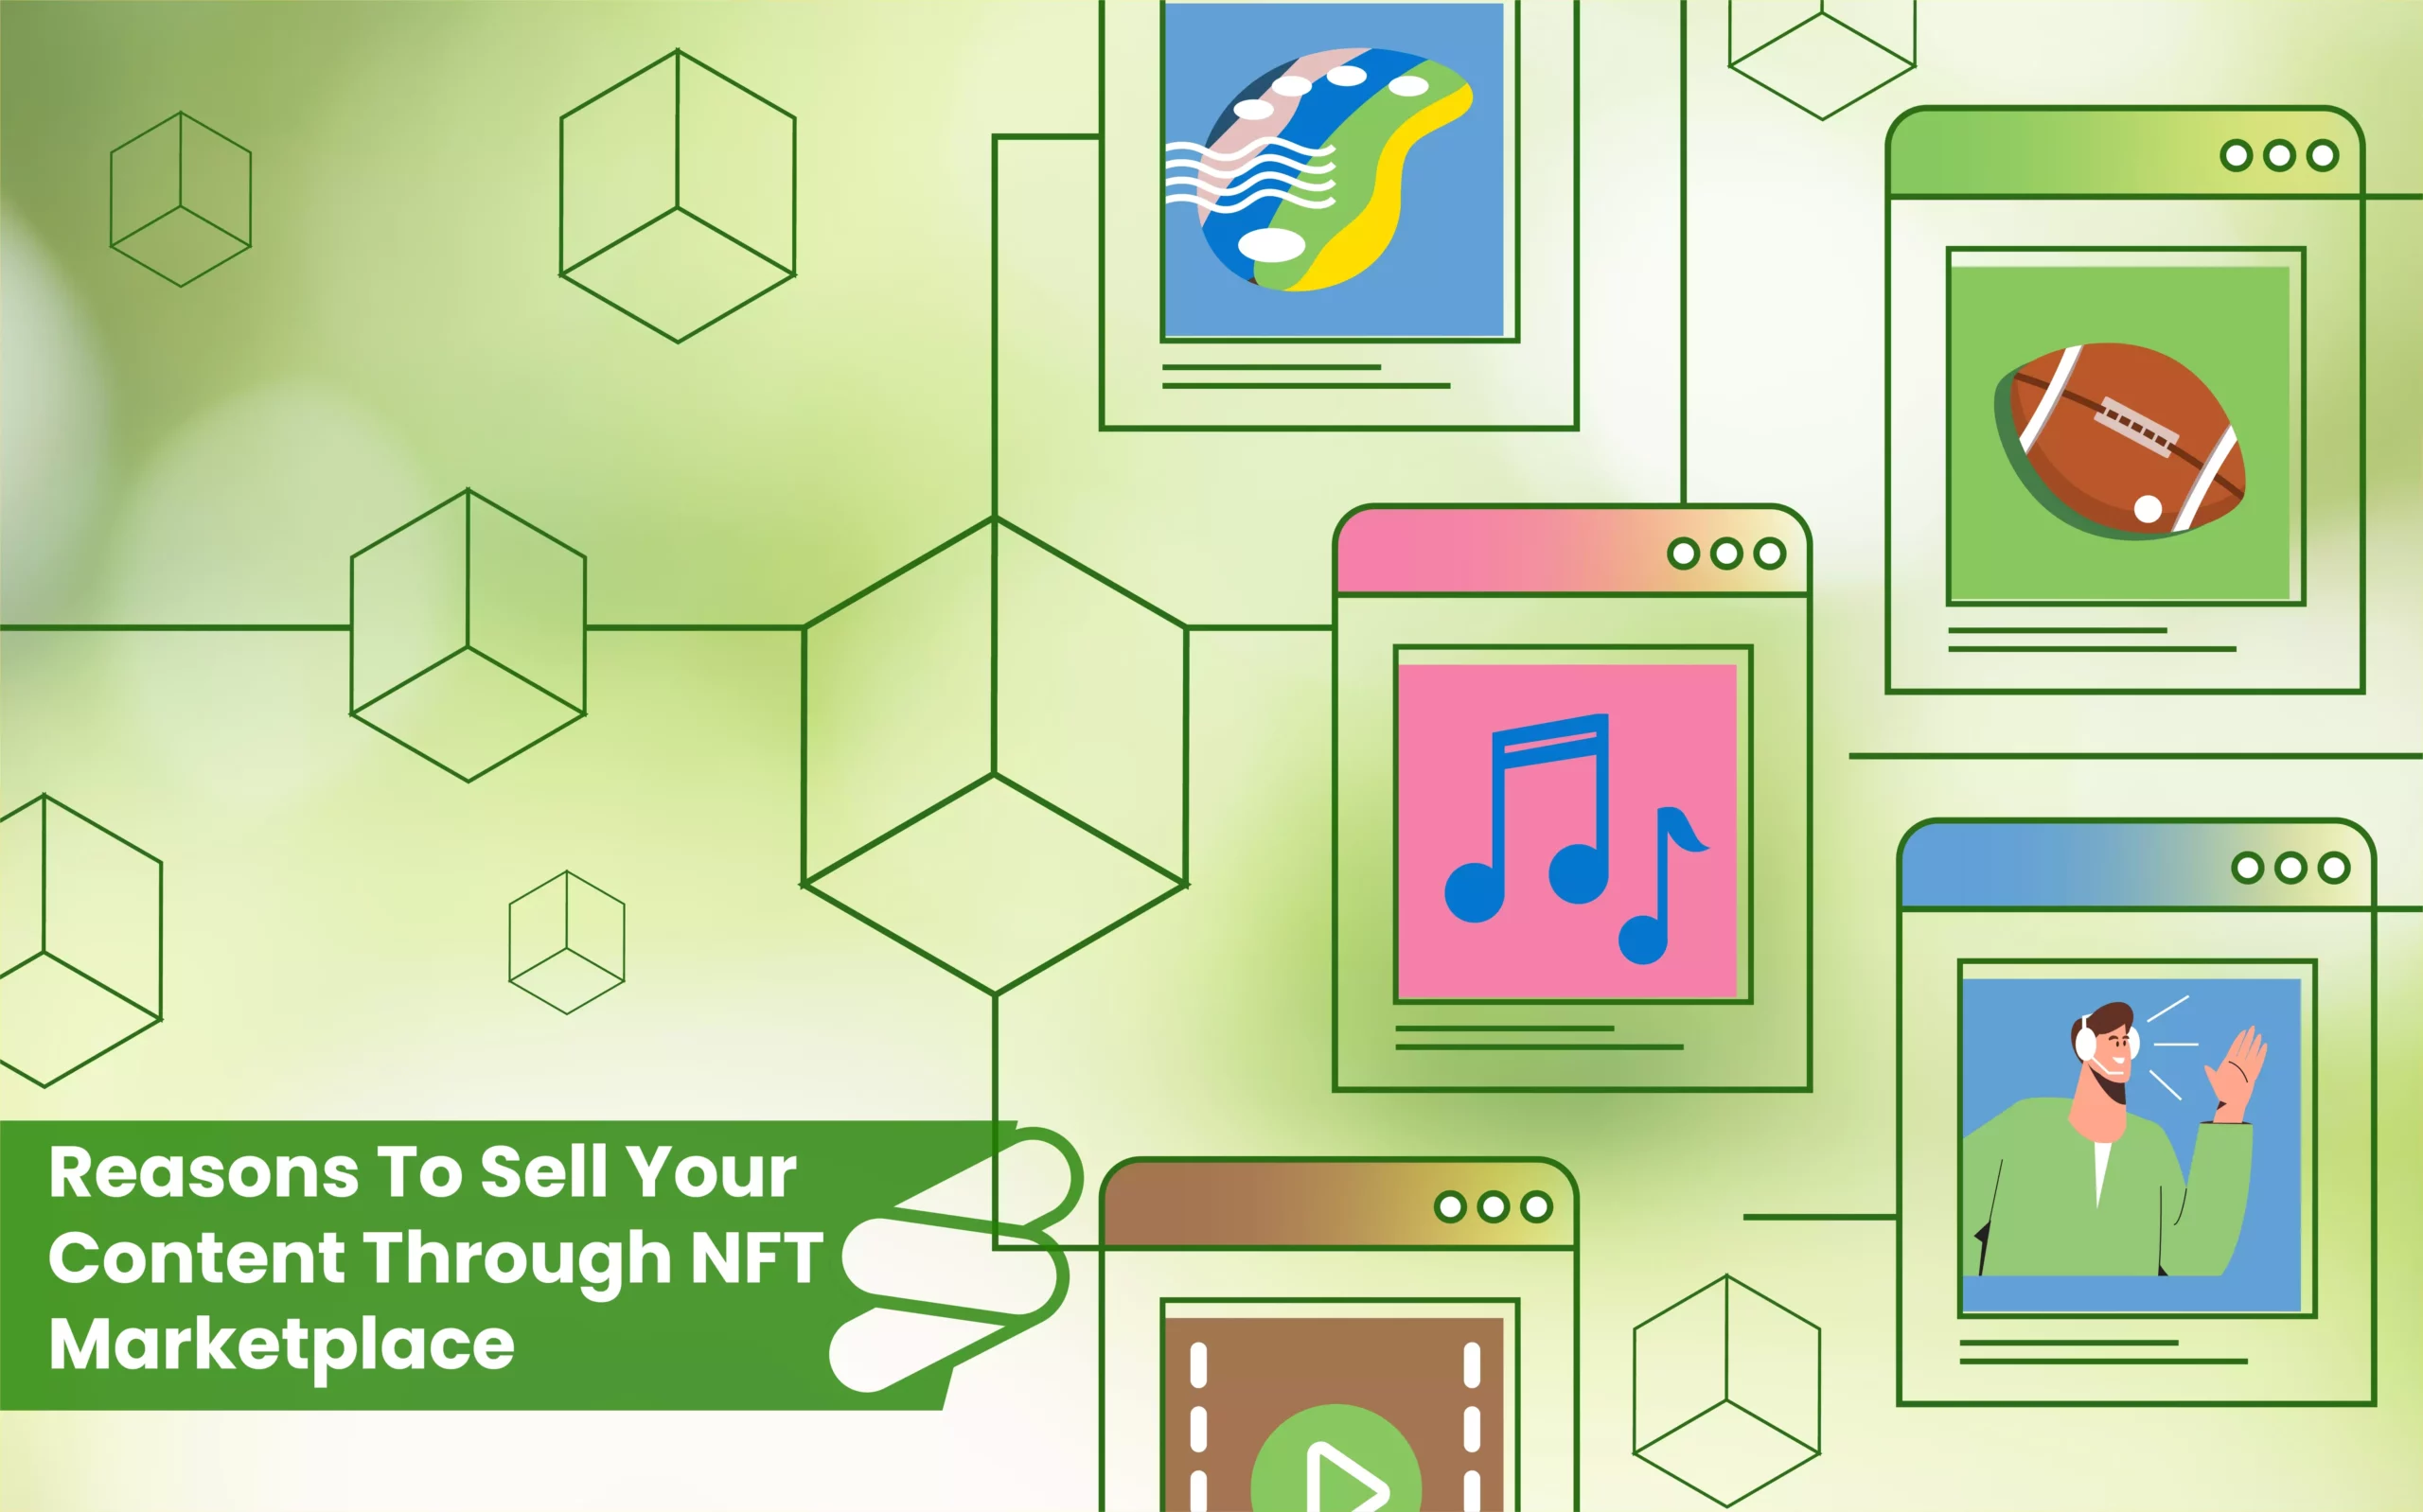 10 Outstanding Reasons To Sell Your Content Through NFT Marketplace